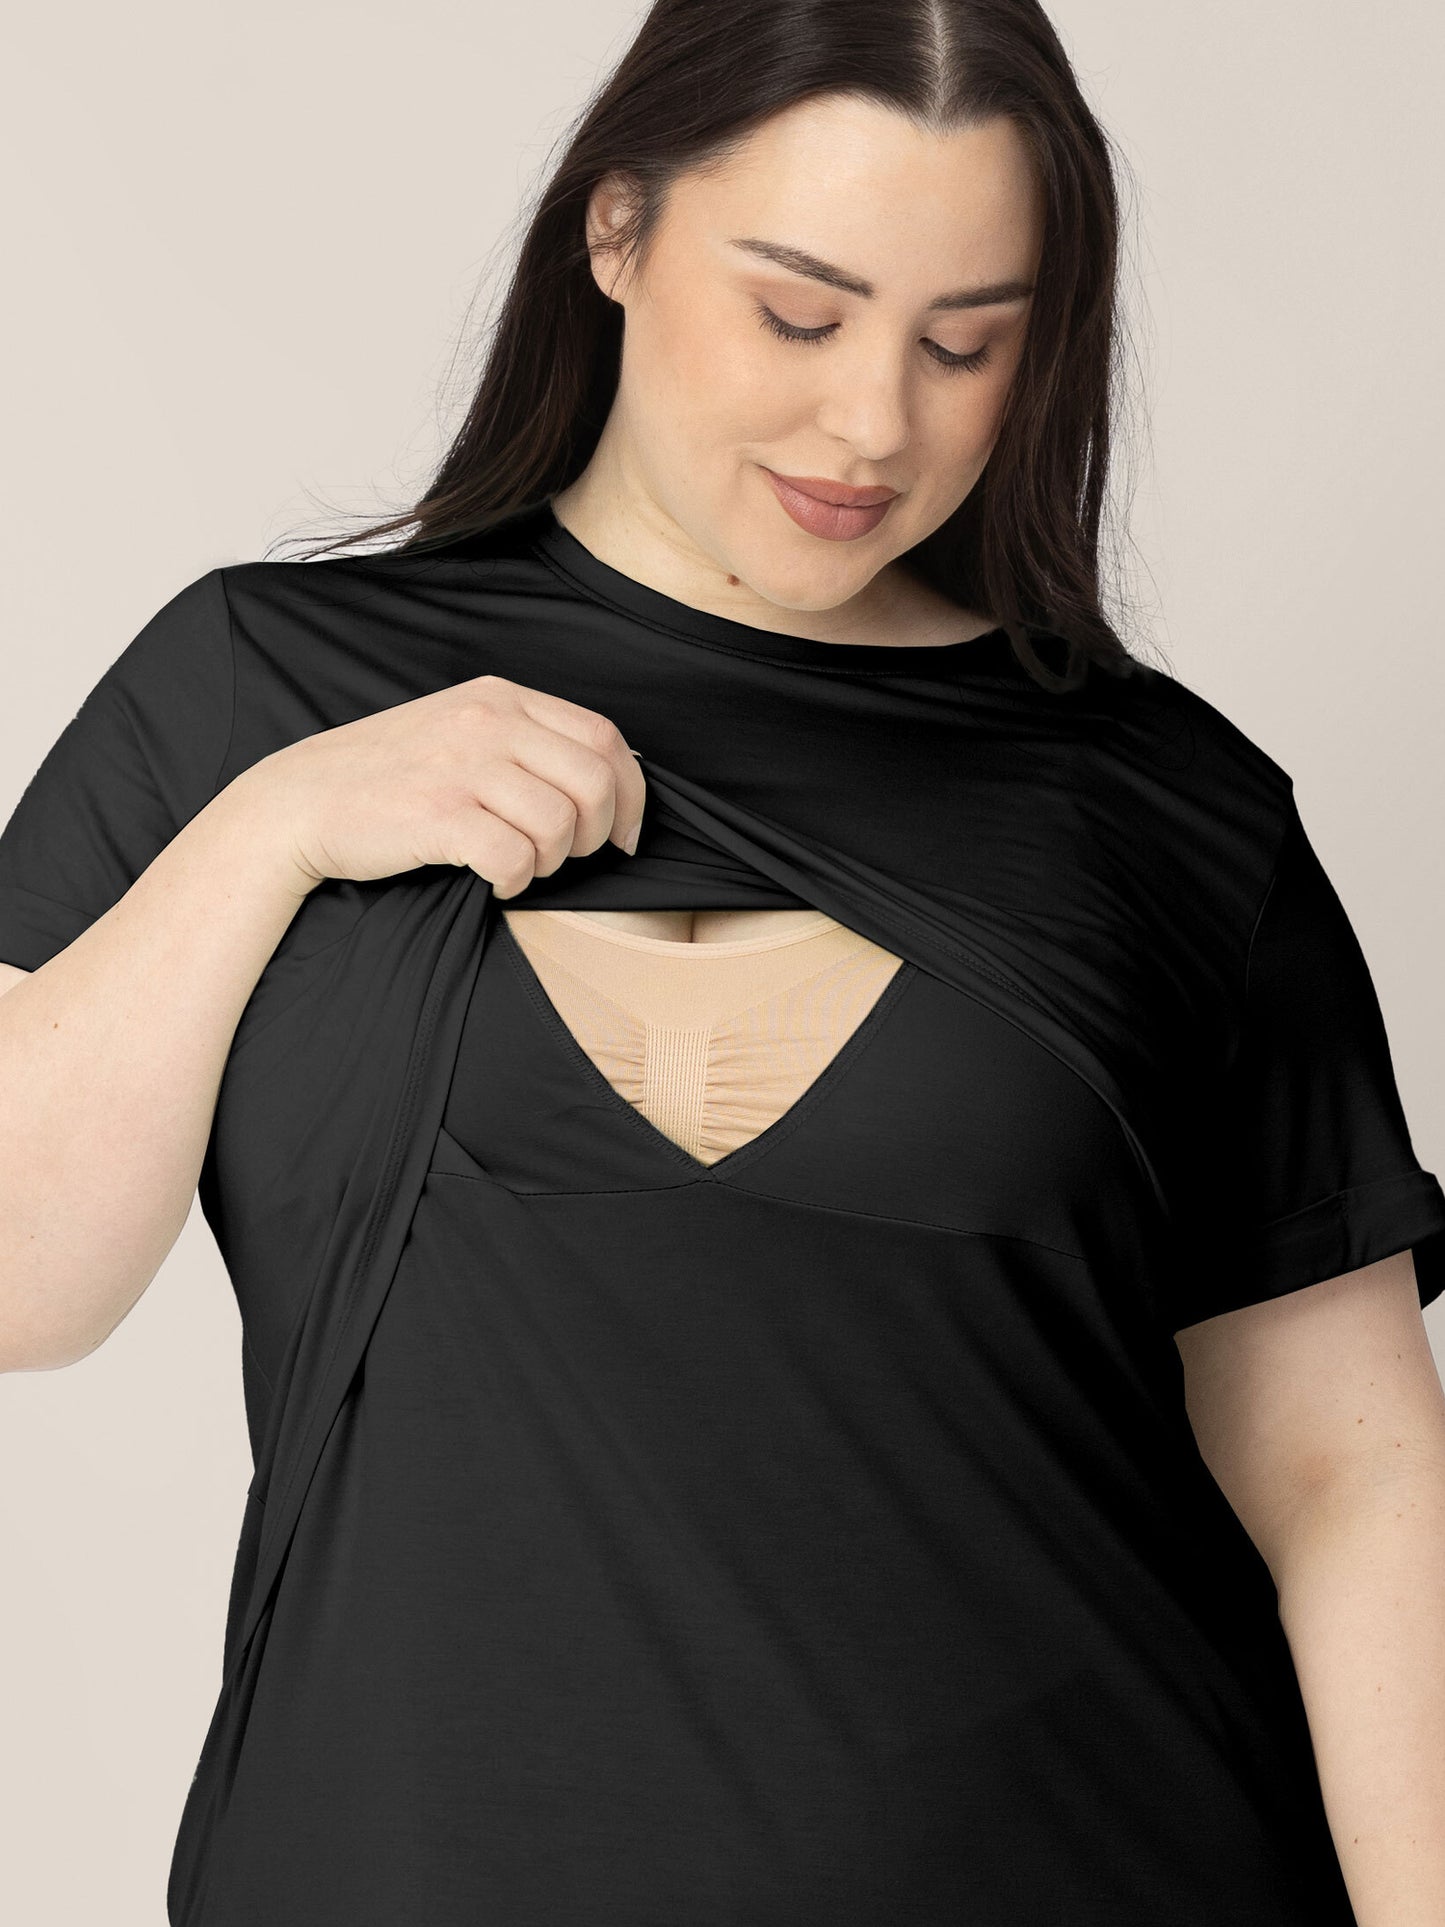 A model wearing the Everyday Asymmetrical Nursing T-shirt in Black, lifting the pull aside nursing flap to demonstrate the easy breastfeeding access.